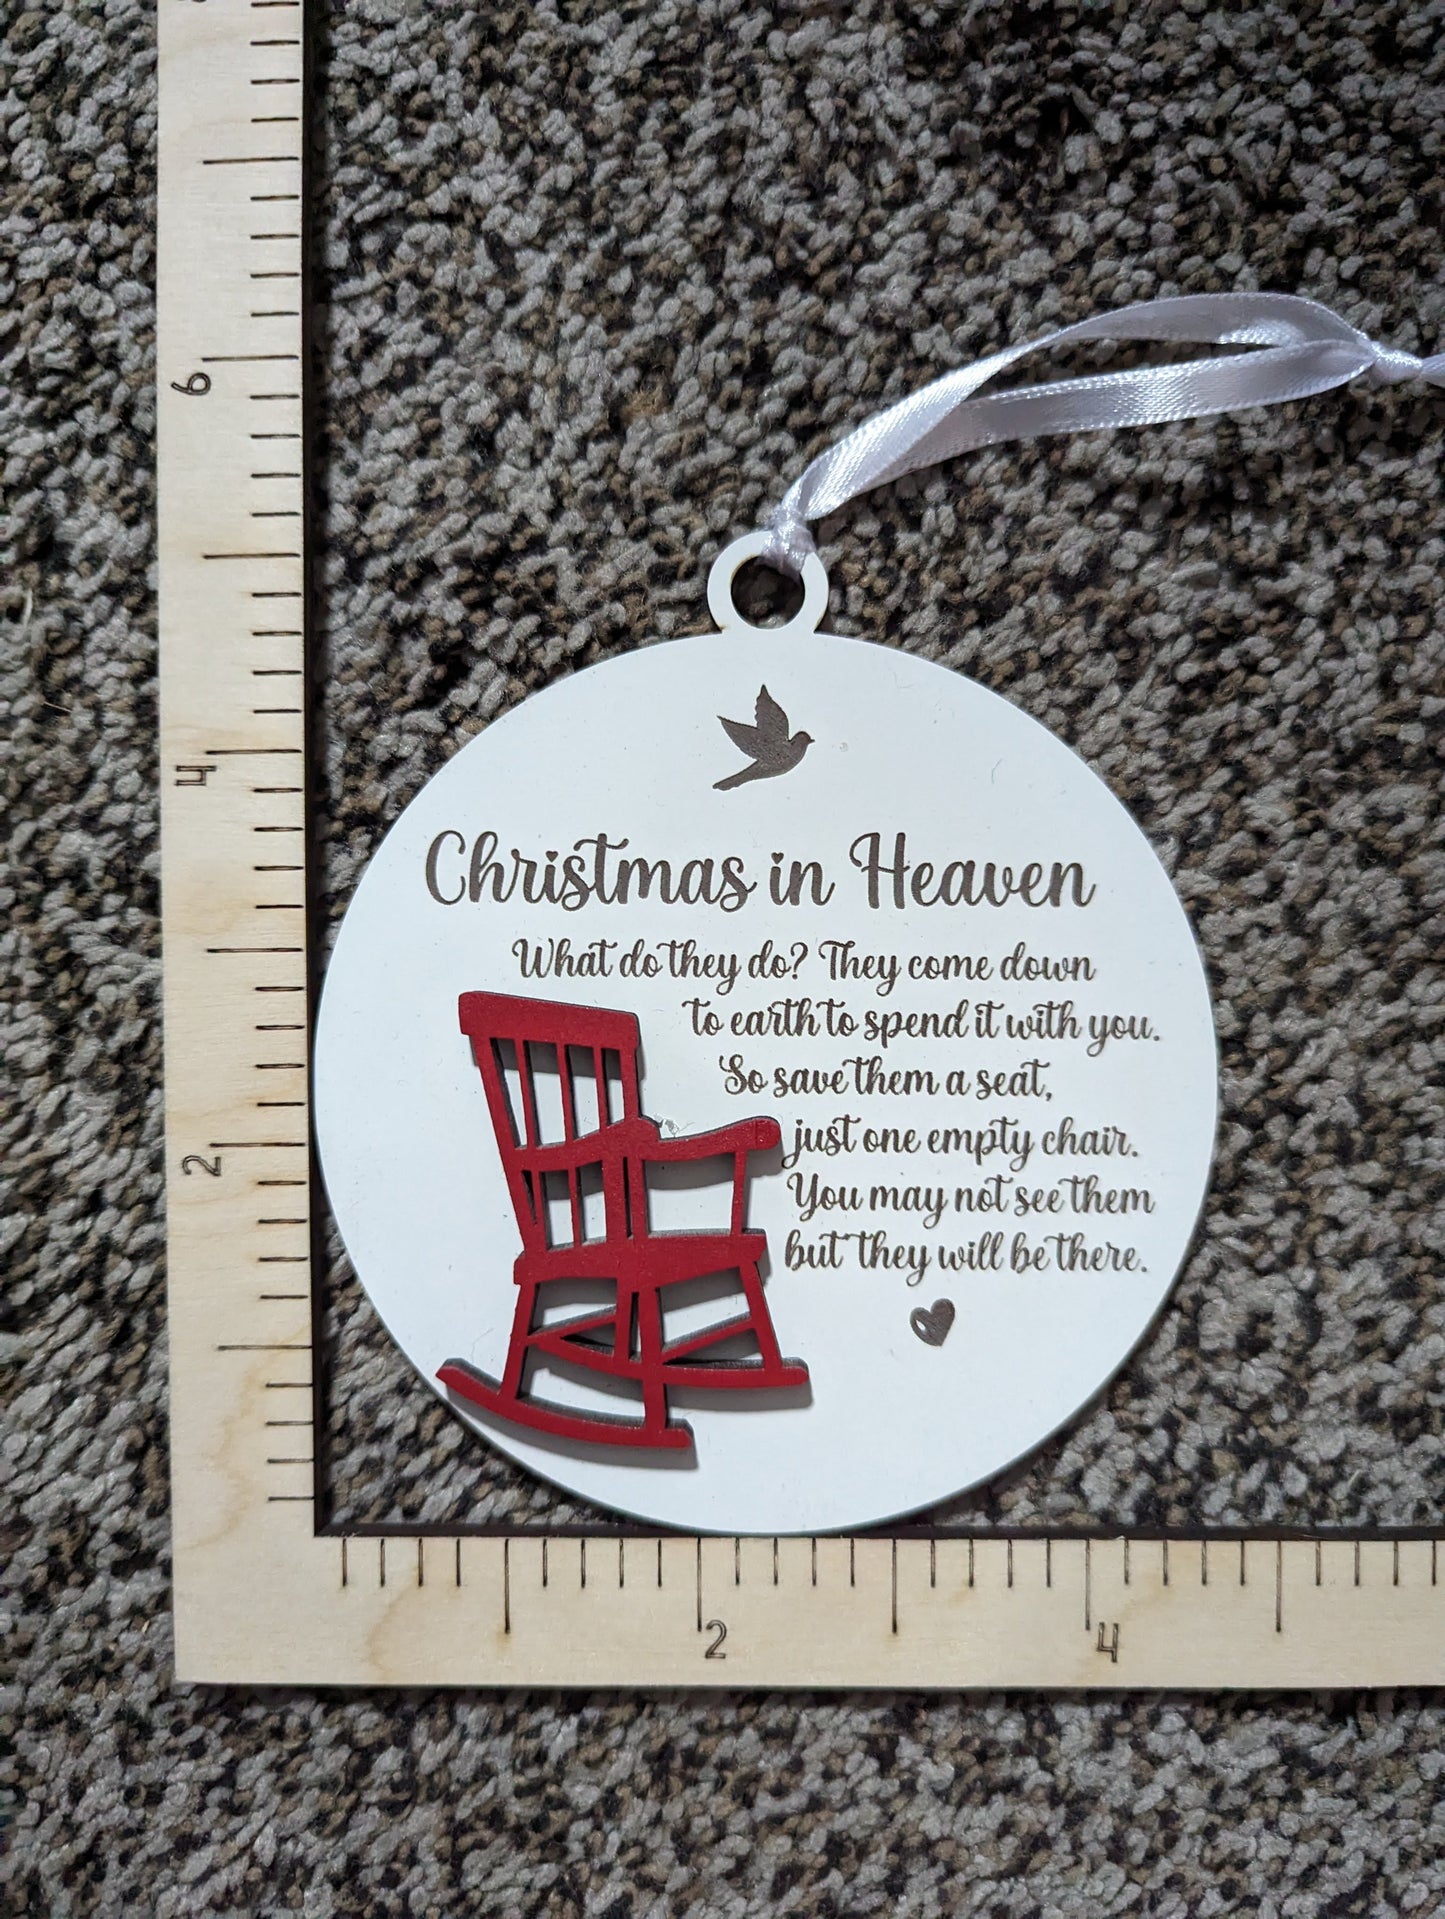 Christmas in Heaven ornament